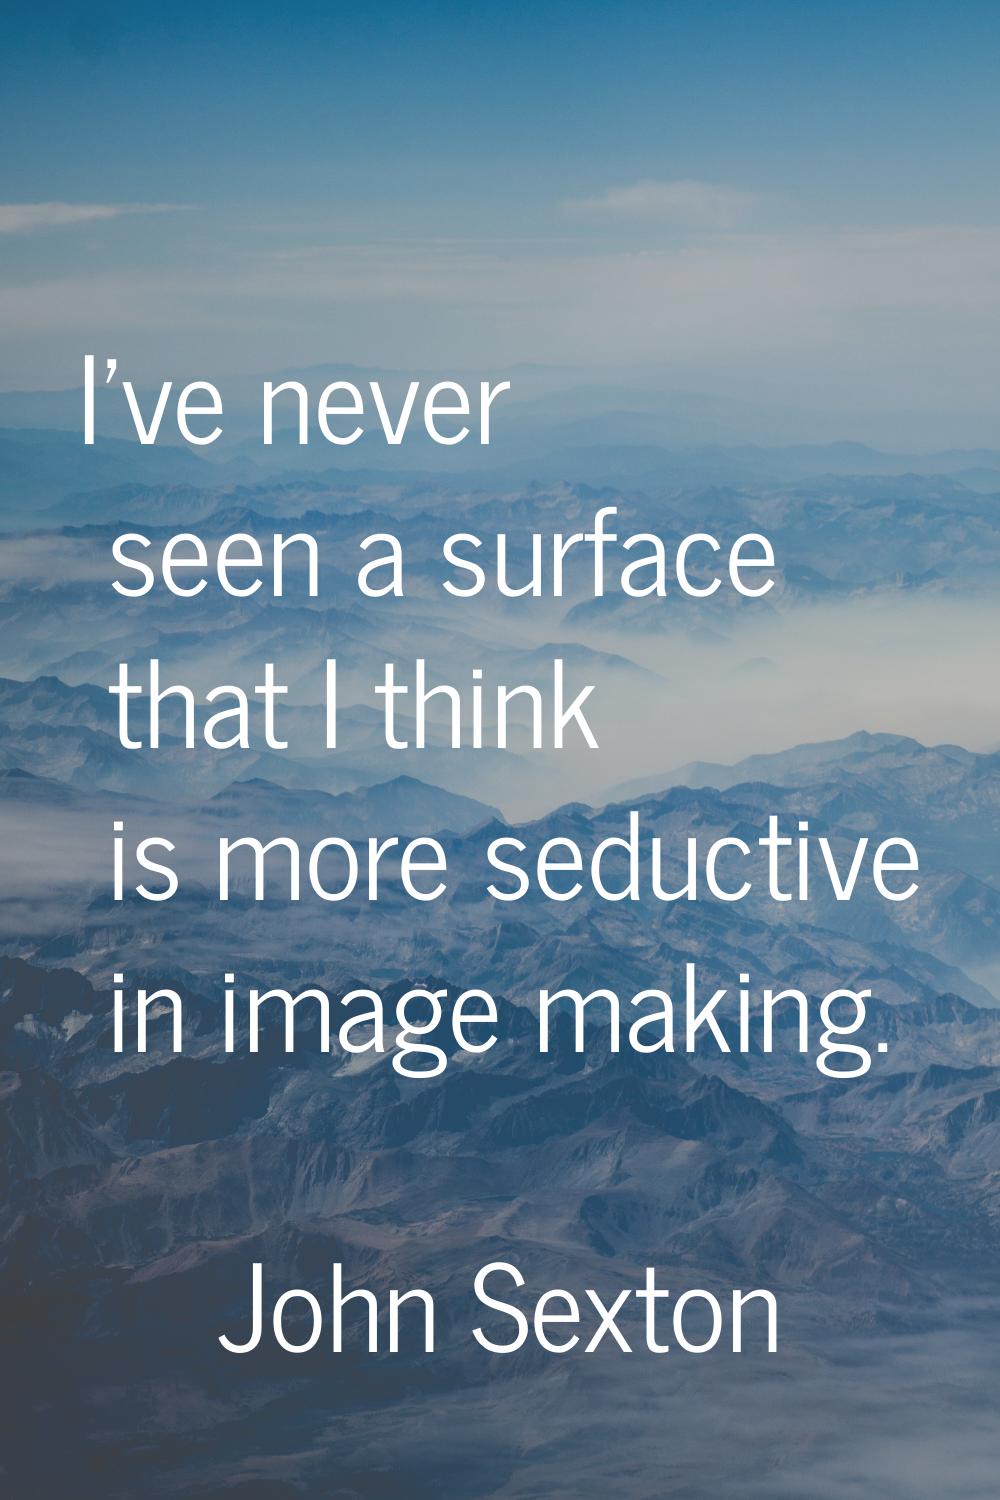 I've never seen a surface that I think is more seductive in image making.